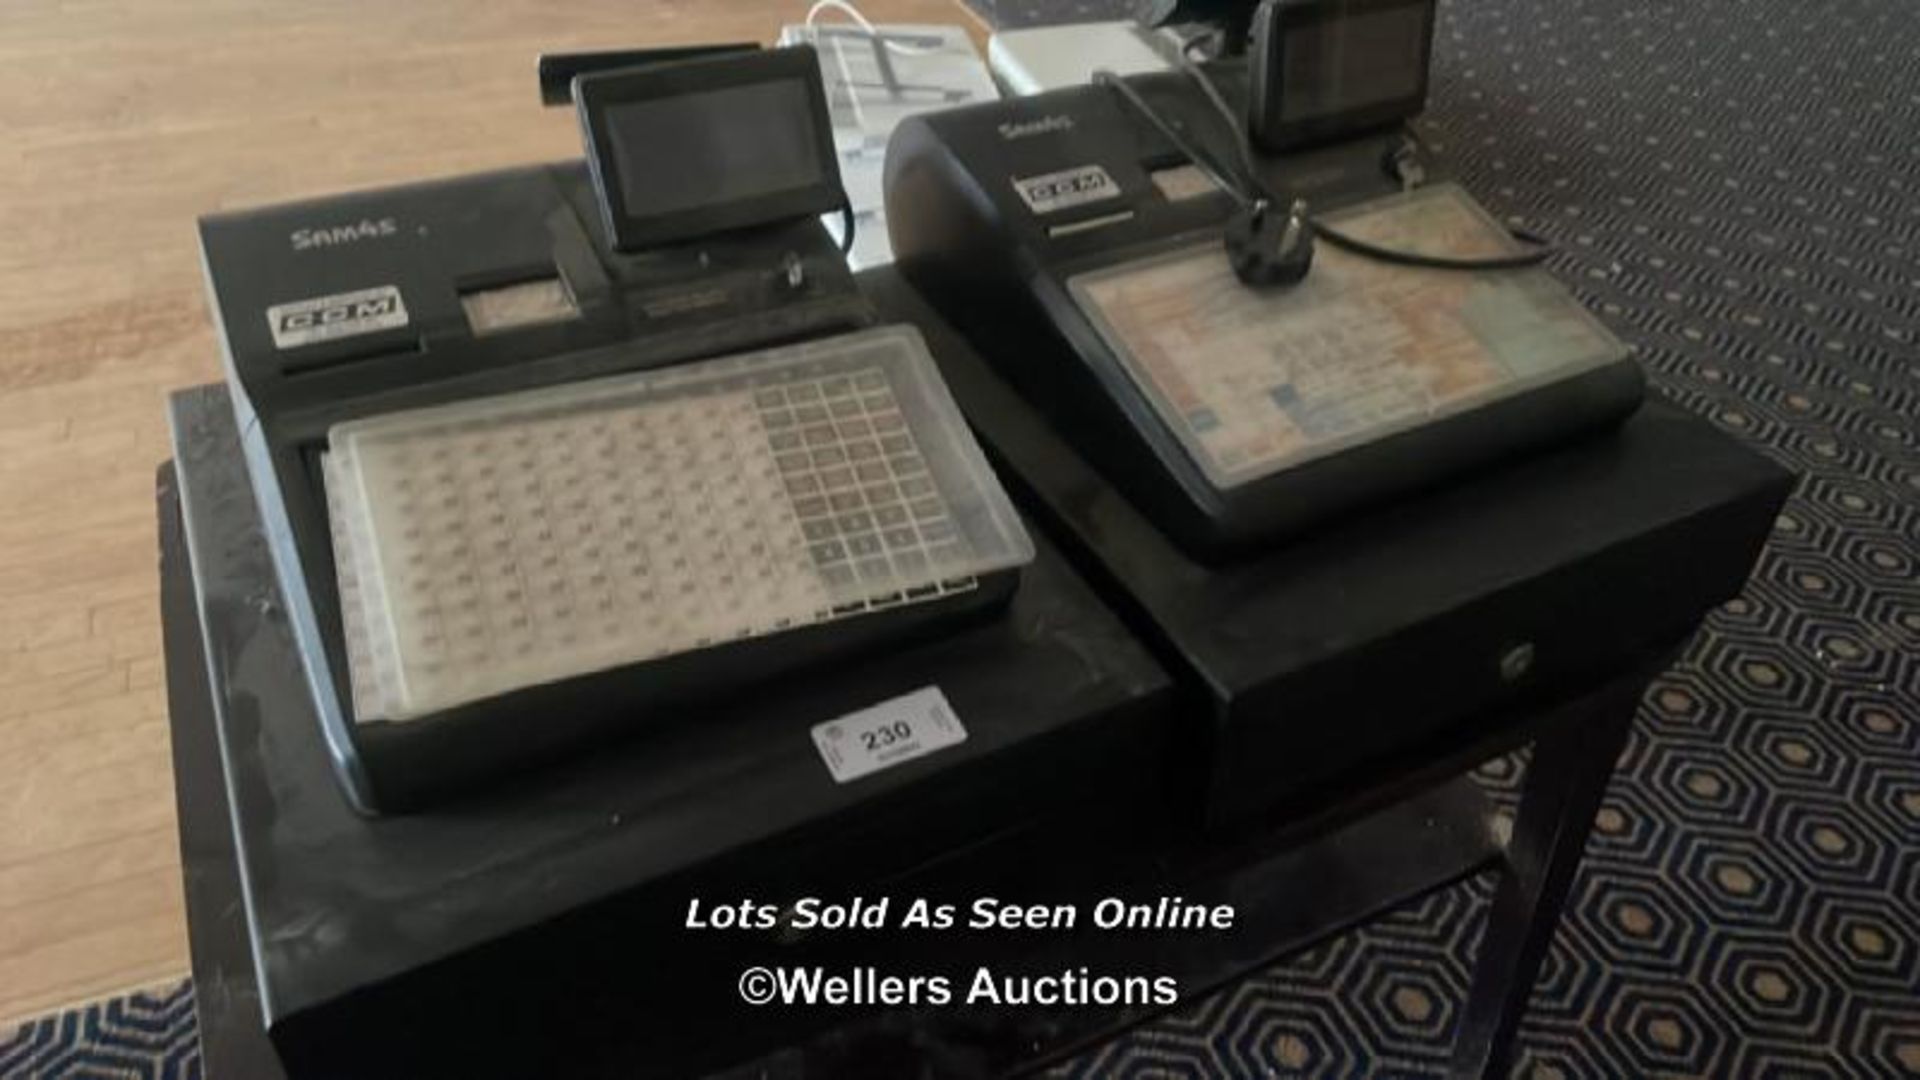 2X SAM 4S ER-900 SMART CASH REGISTERS / COLLECTION LOCATION: OLD WOKING DISTRICT RECREATION CLUB, 33